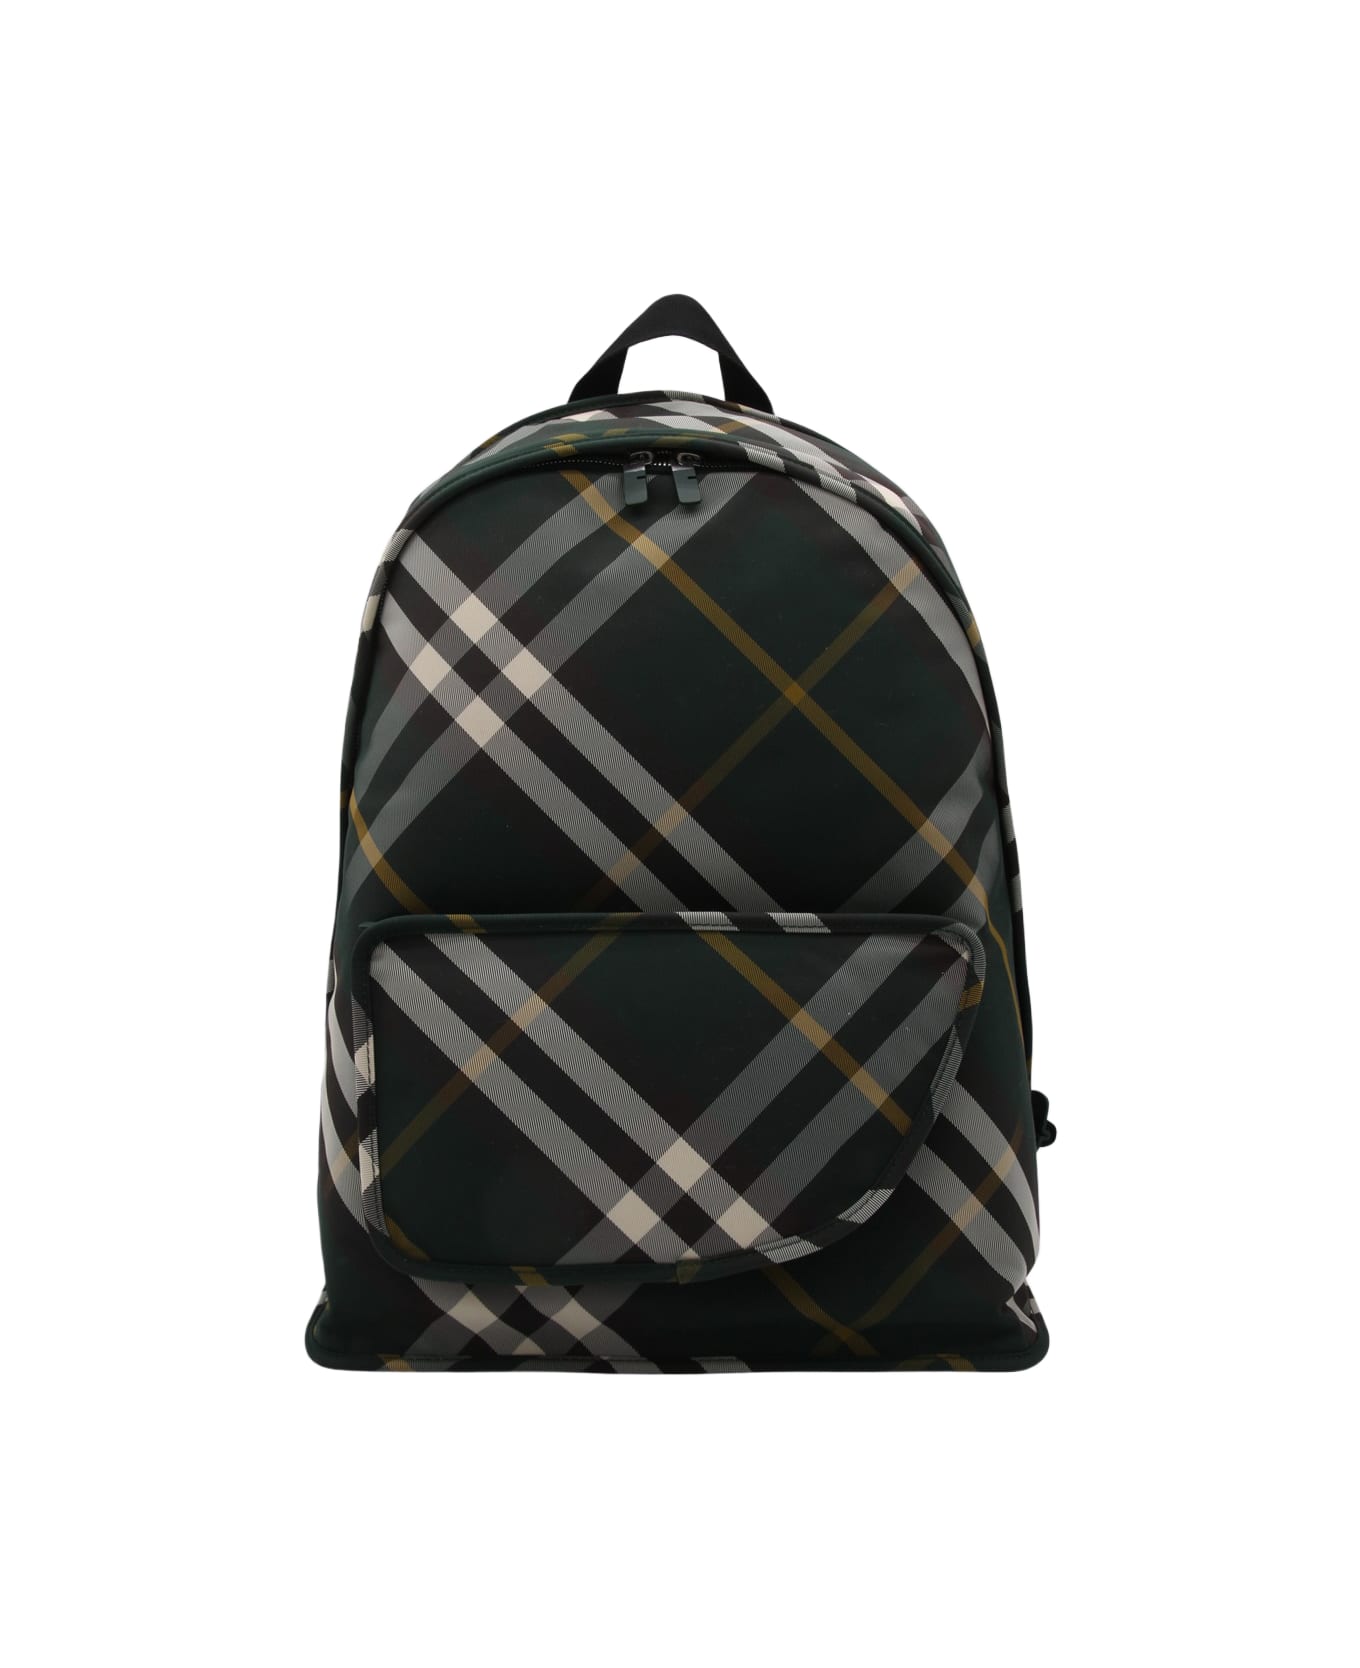 Burberry Green Backpack - IVY